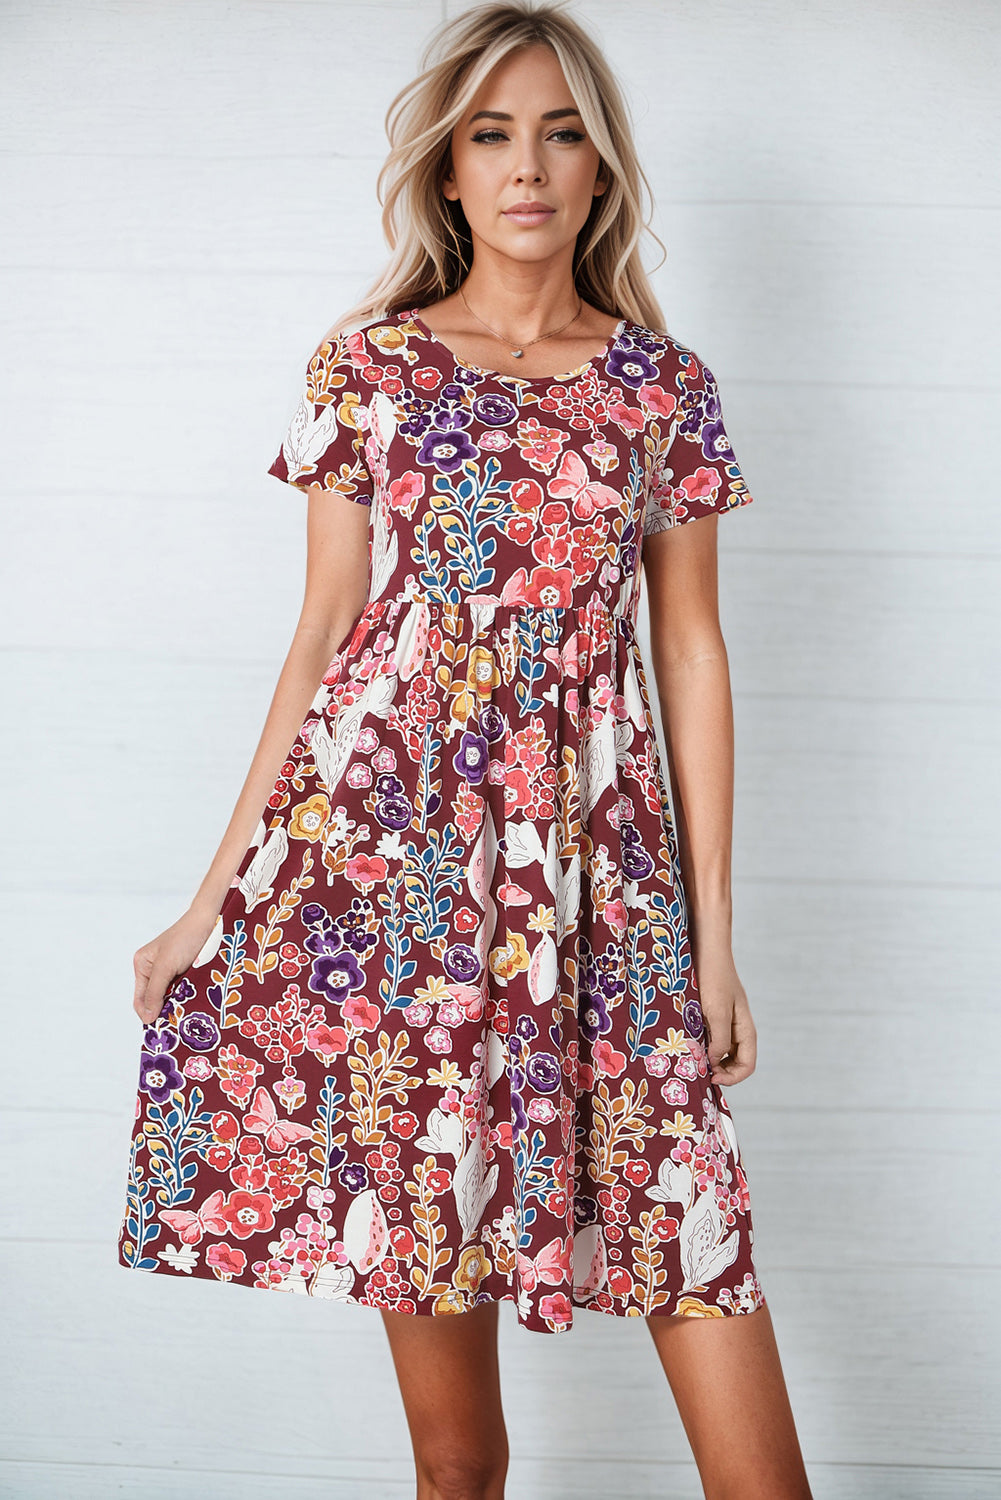 Chic Floral Mini Dress: Perfect for Summer, Beach Weddings, and Parties!